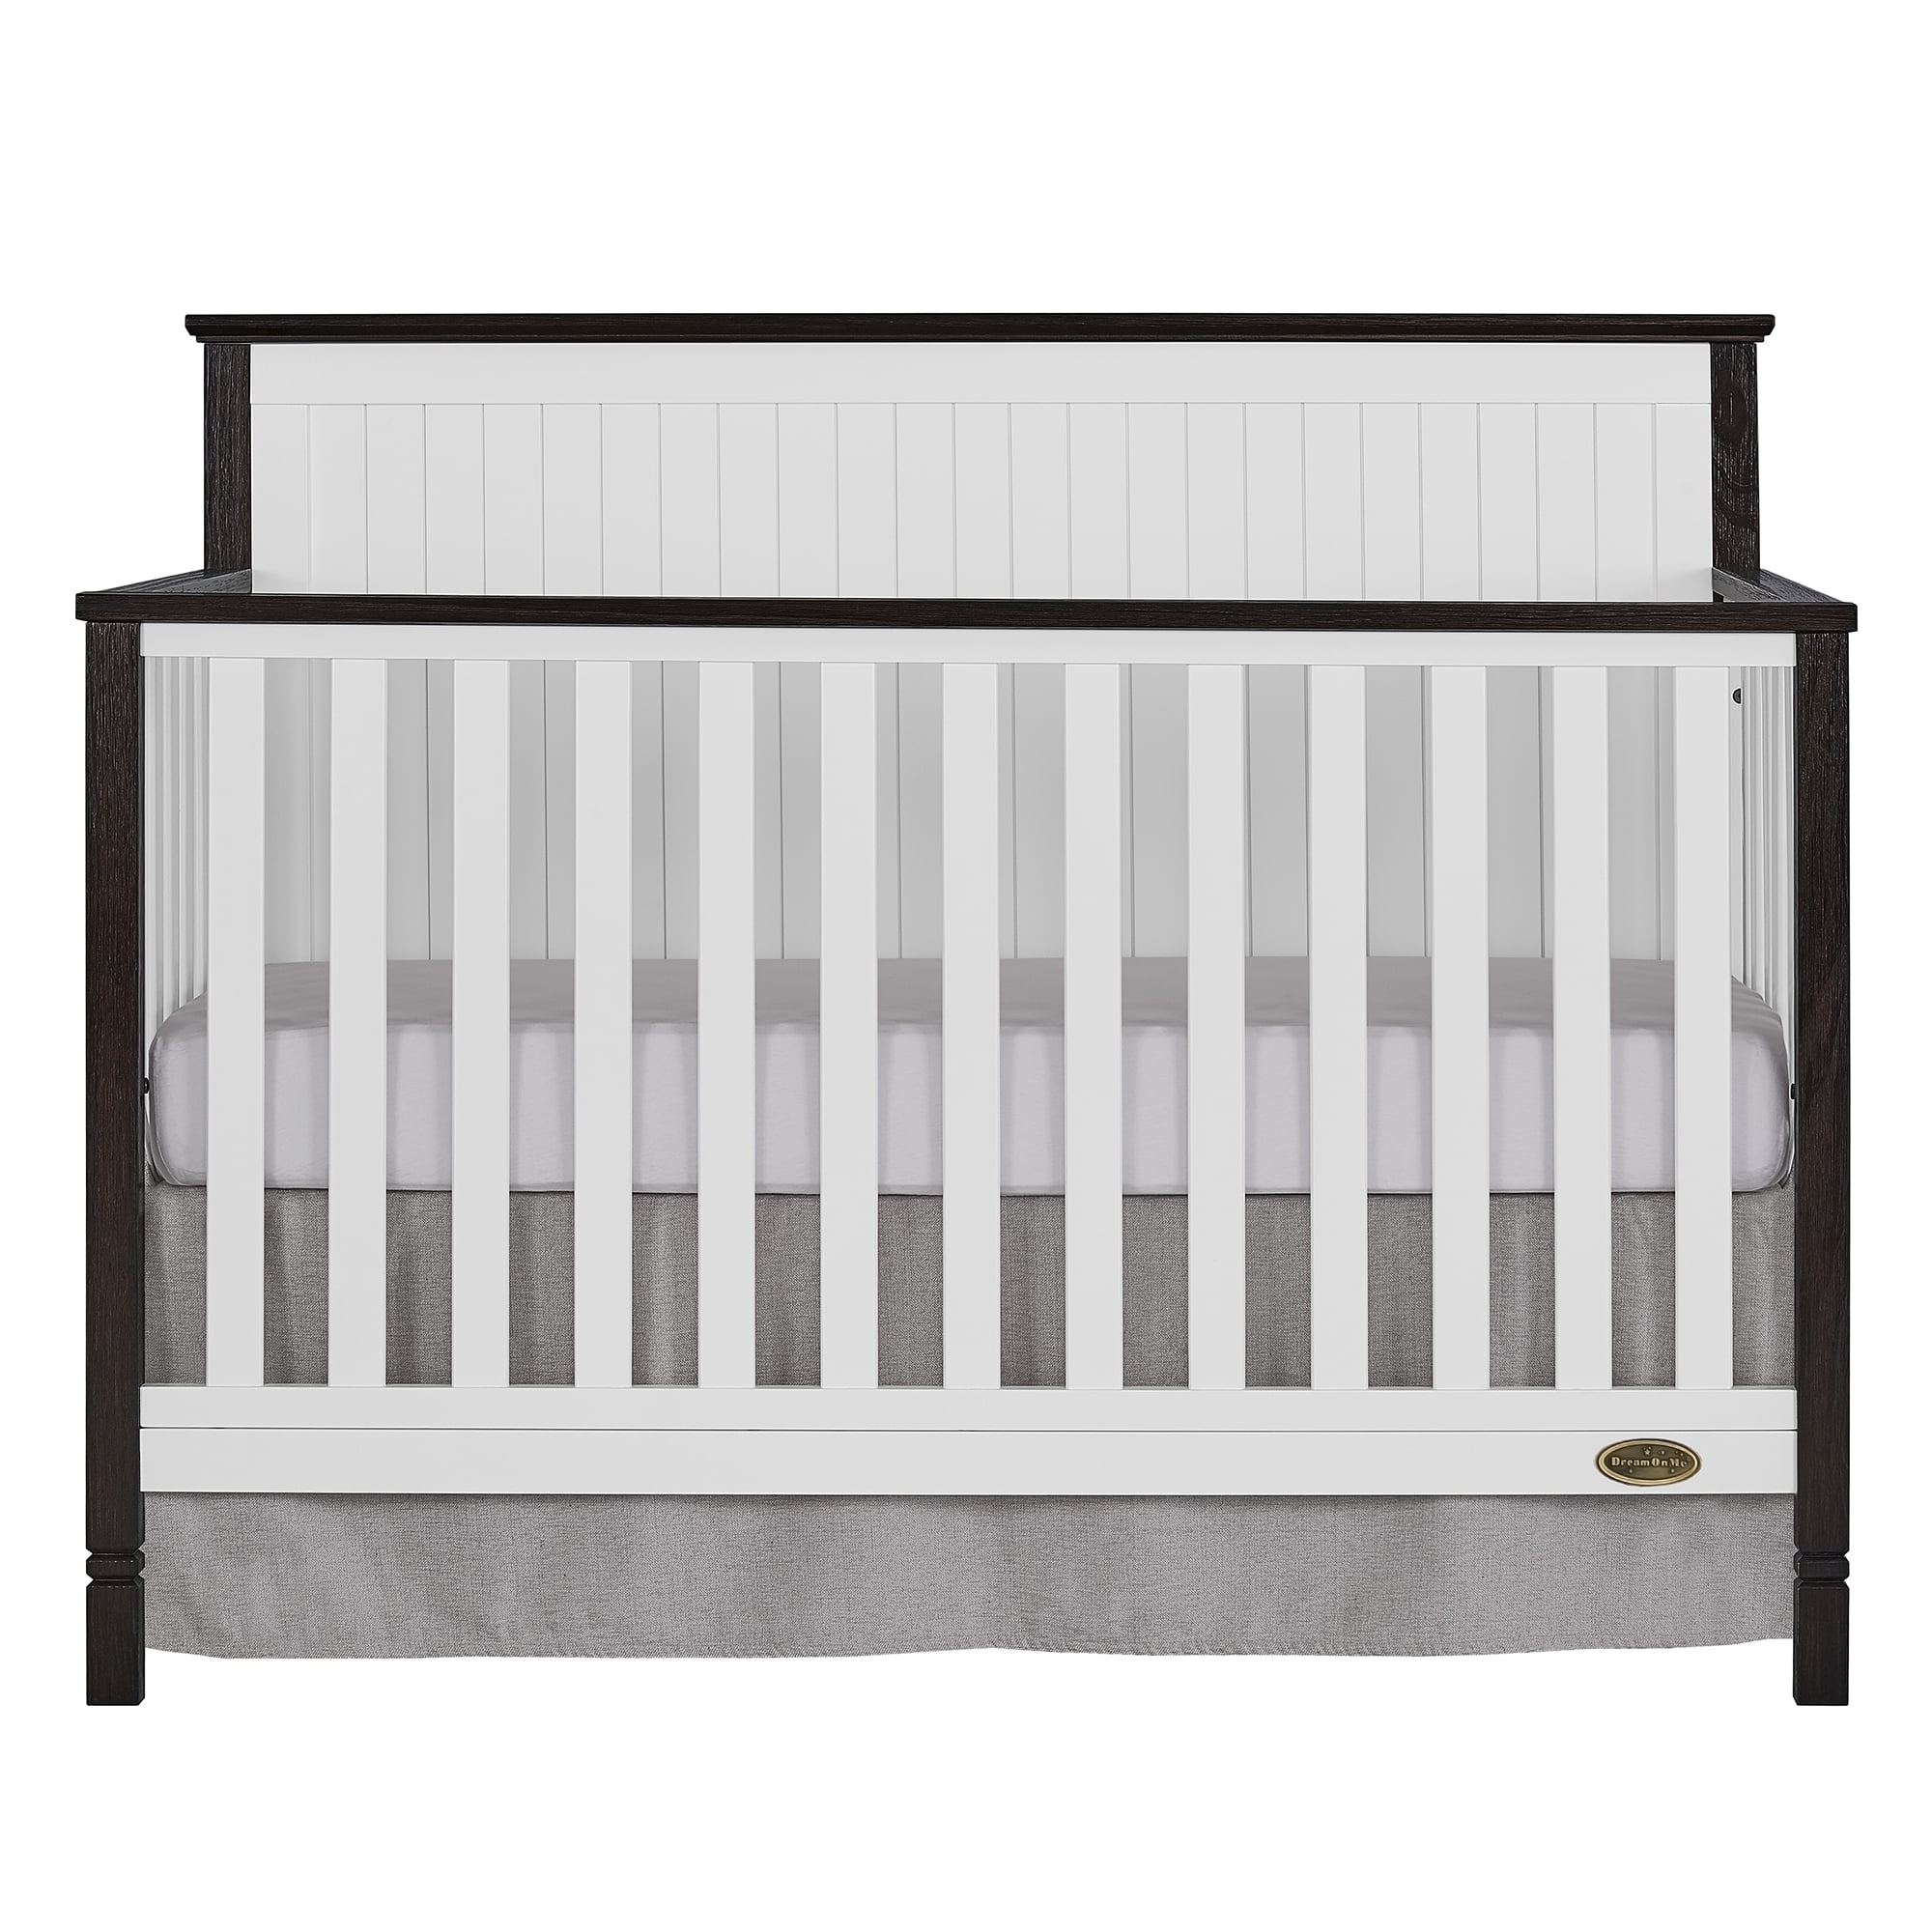 hayes 4 in 1 crib